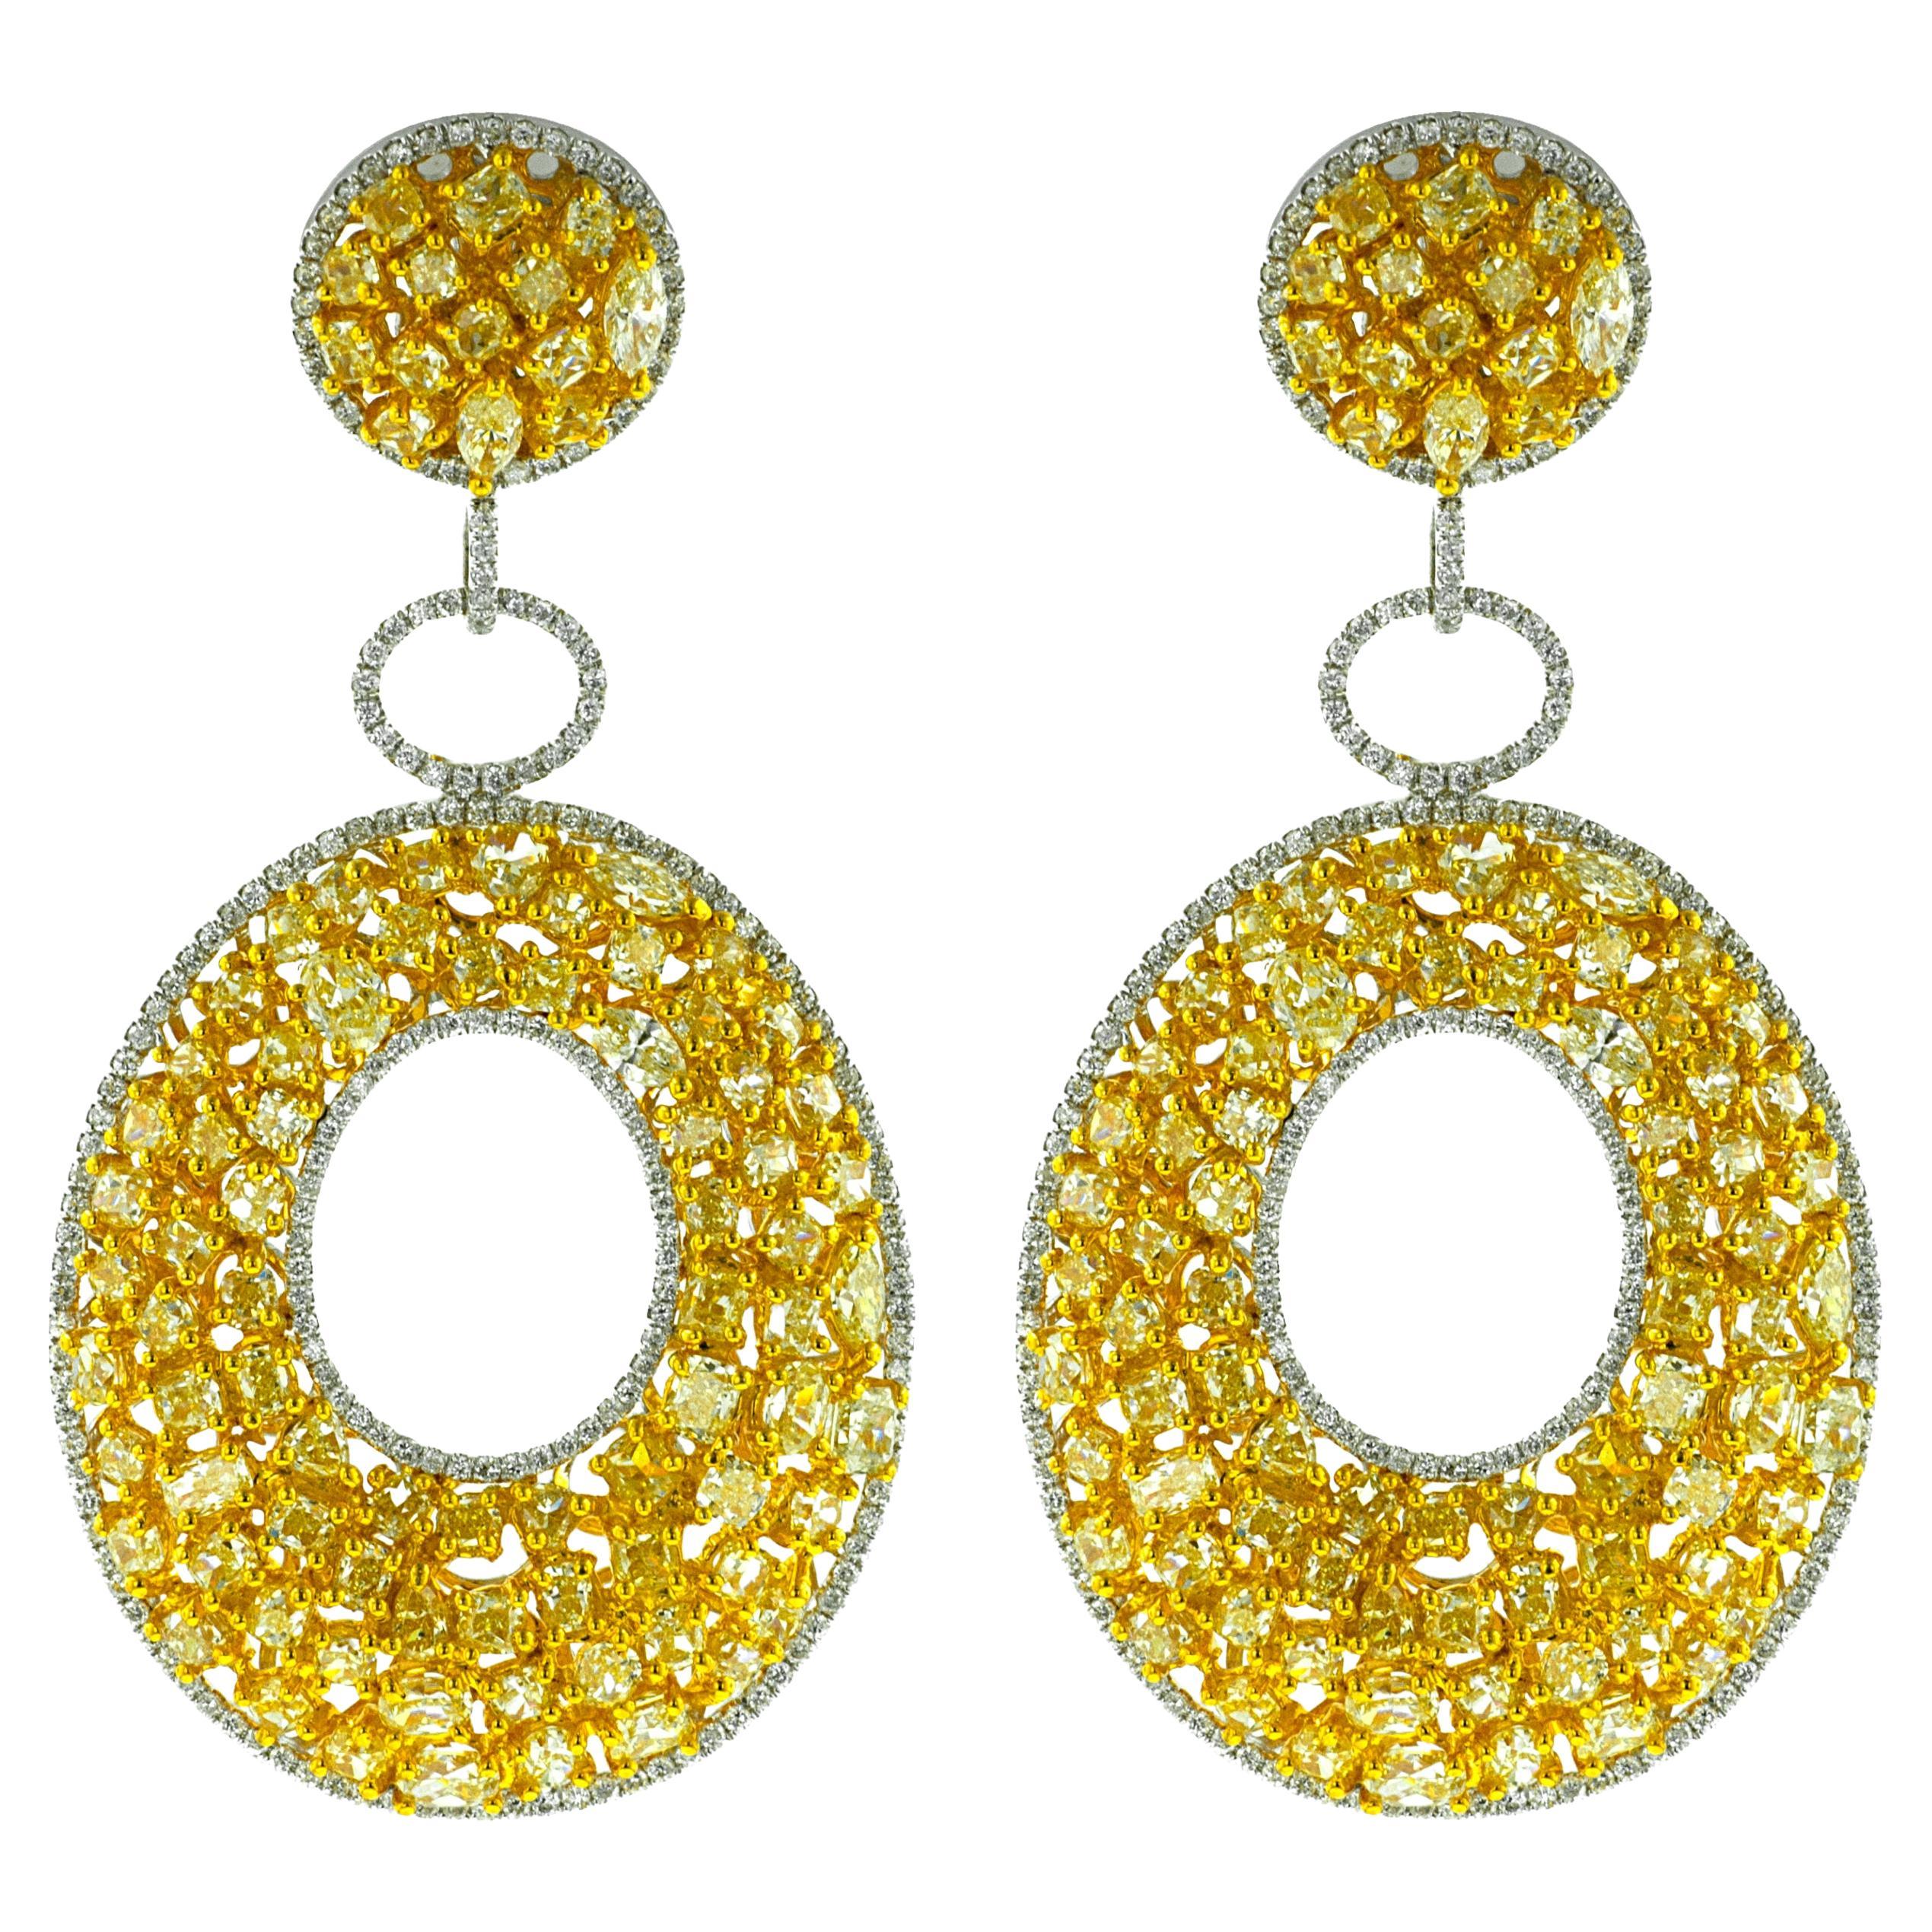 Diana M. 18 kt White and Yellow Gold Fancy Diamond earrings containing 20.12 cts For Sale